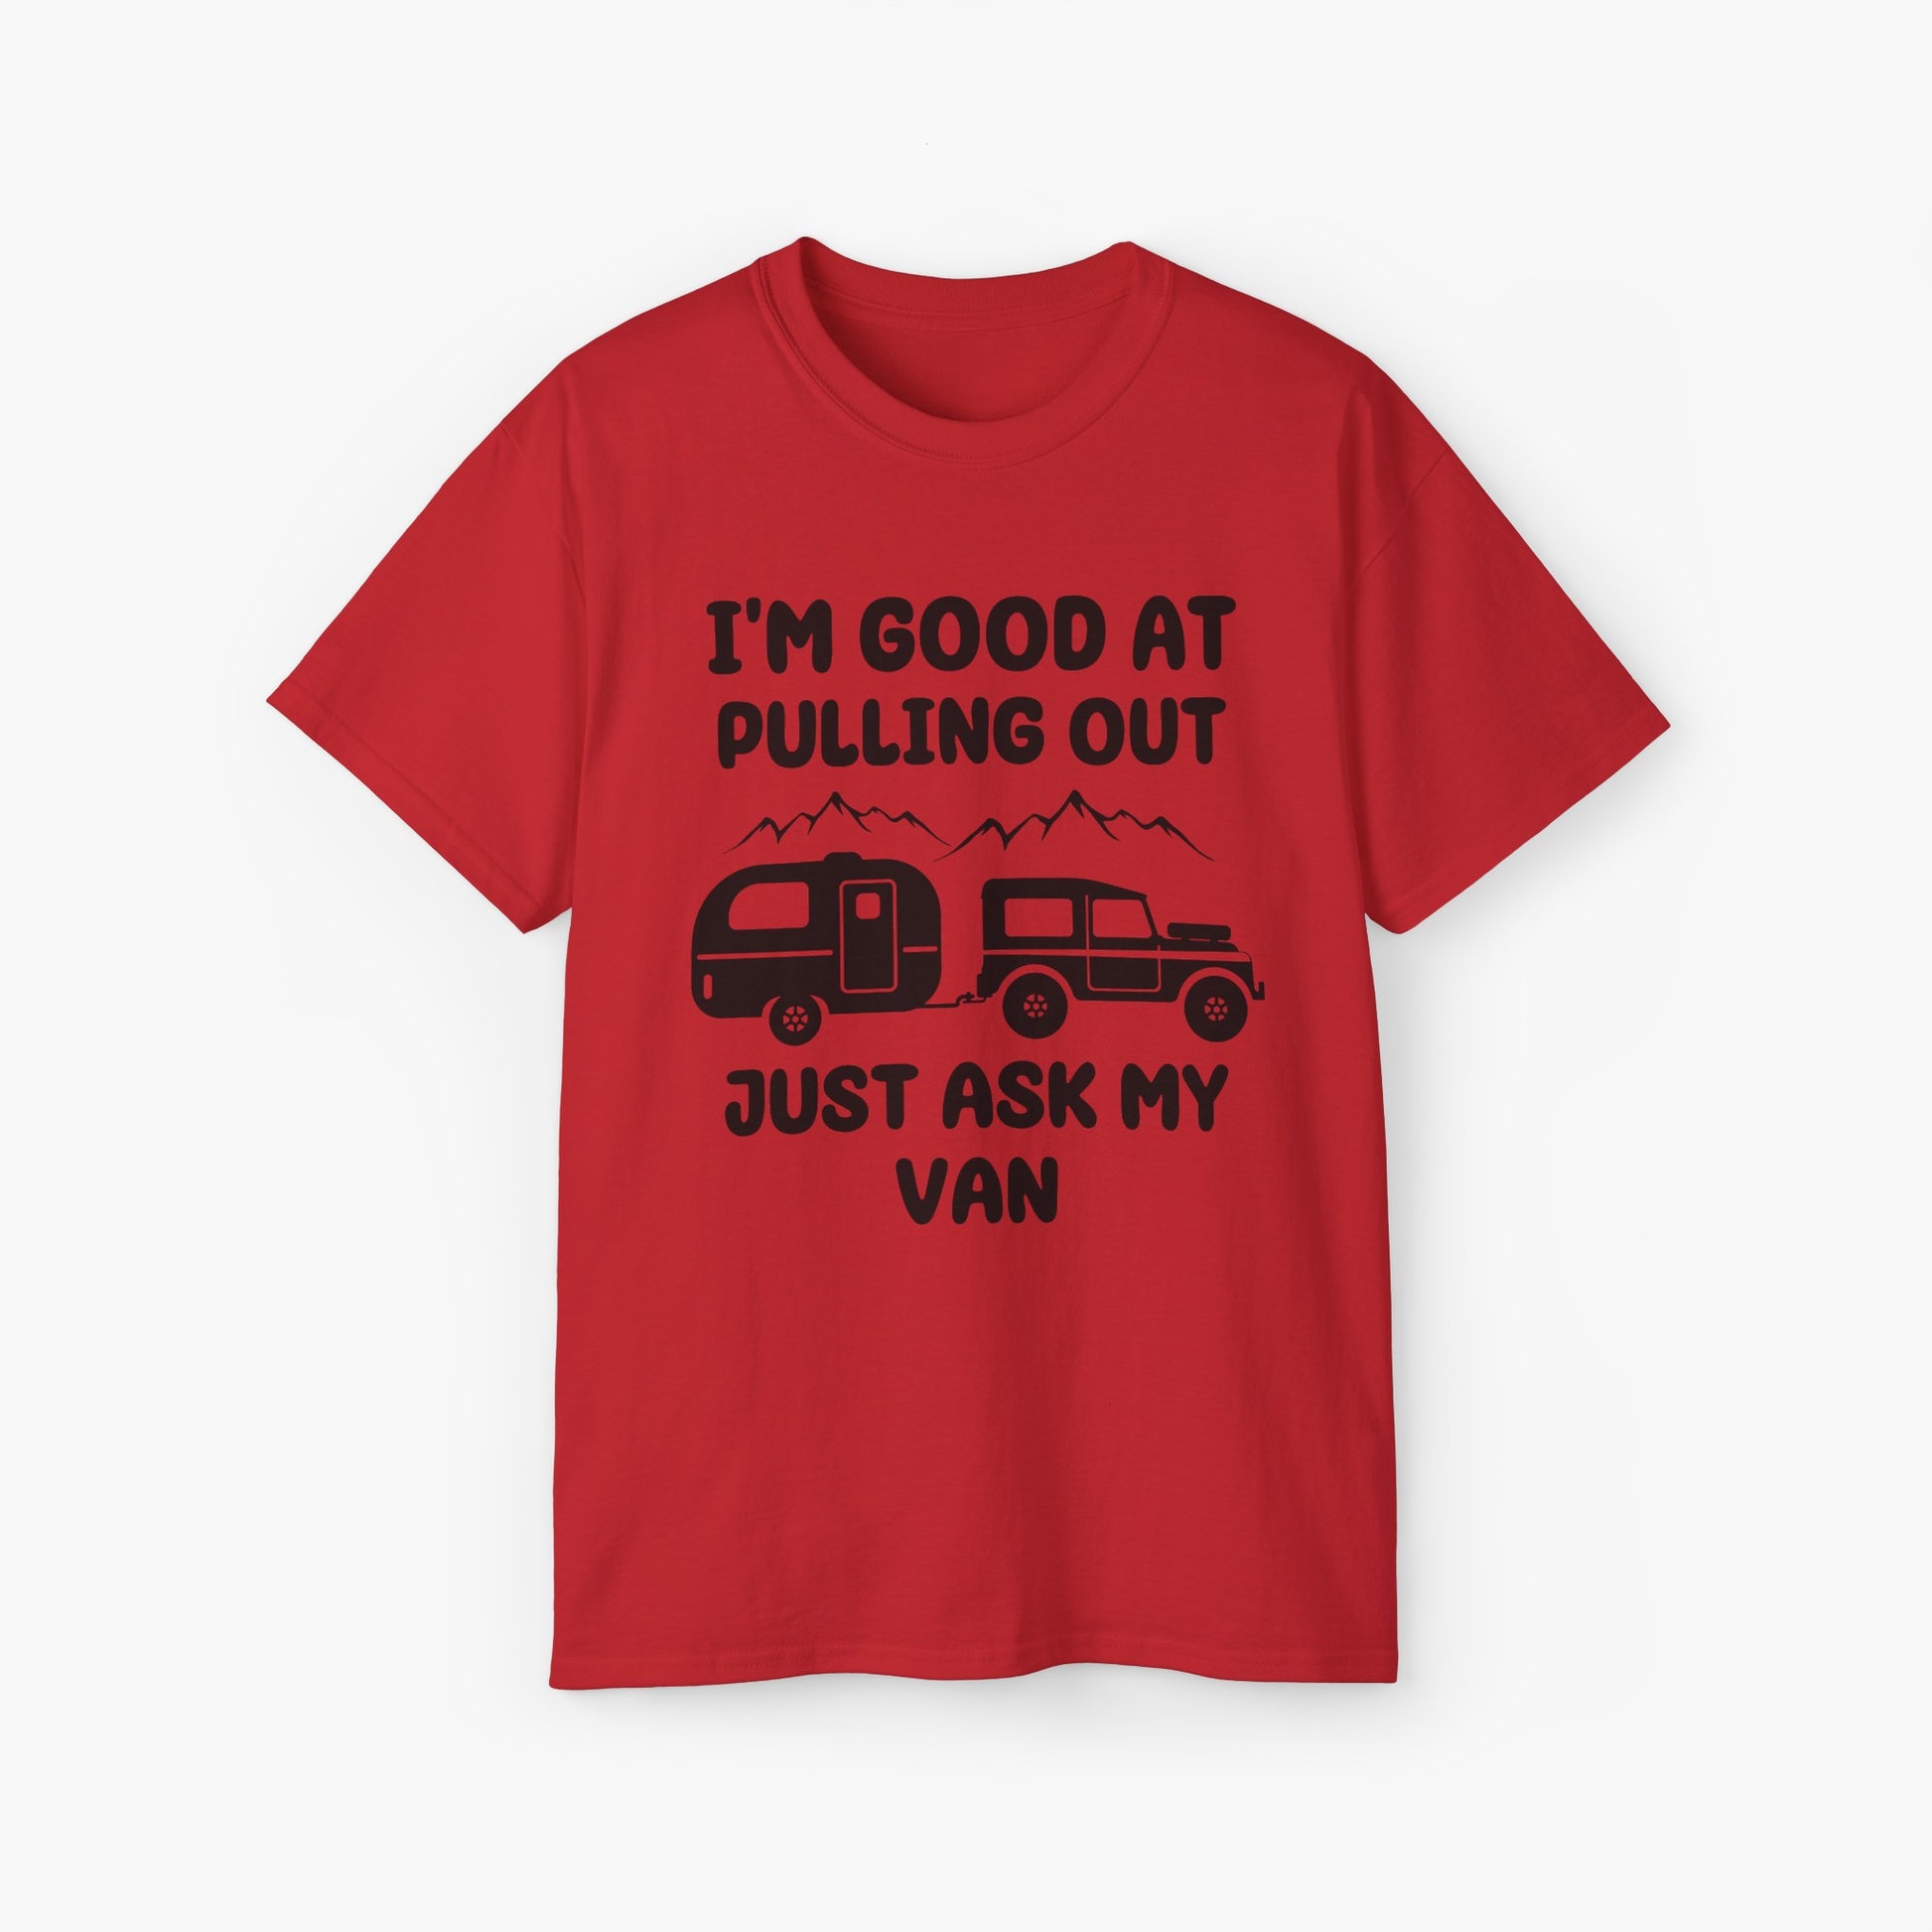 Red t-shirt with humorous text 'I'm good at pulling out, just ask my van,' featuring an image of a truck pulling a camping van, set against mountains on a plain background.